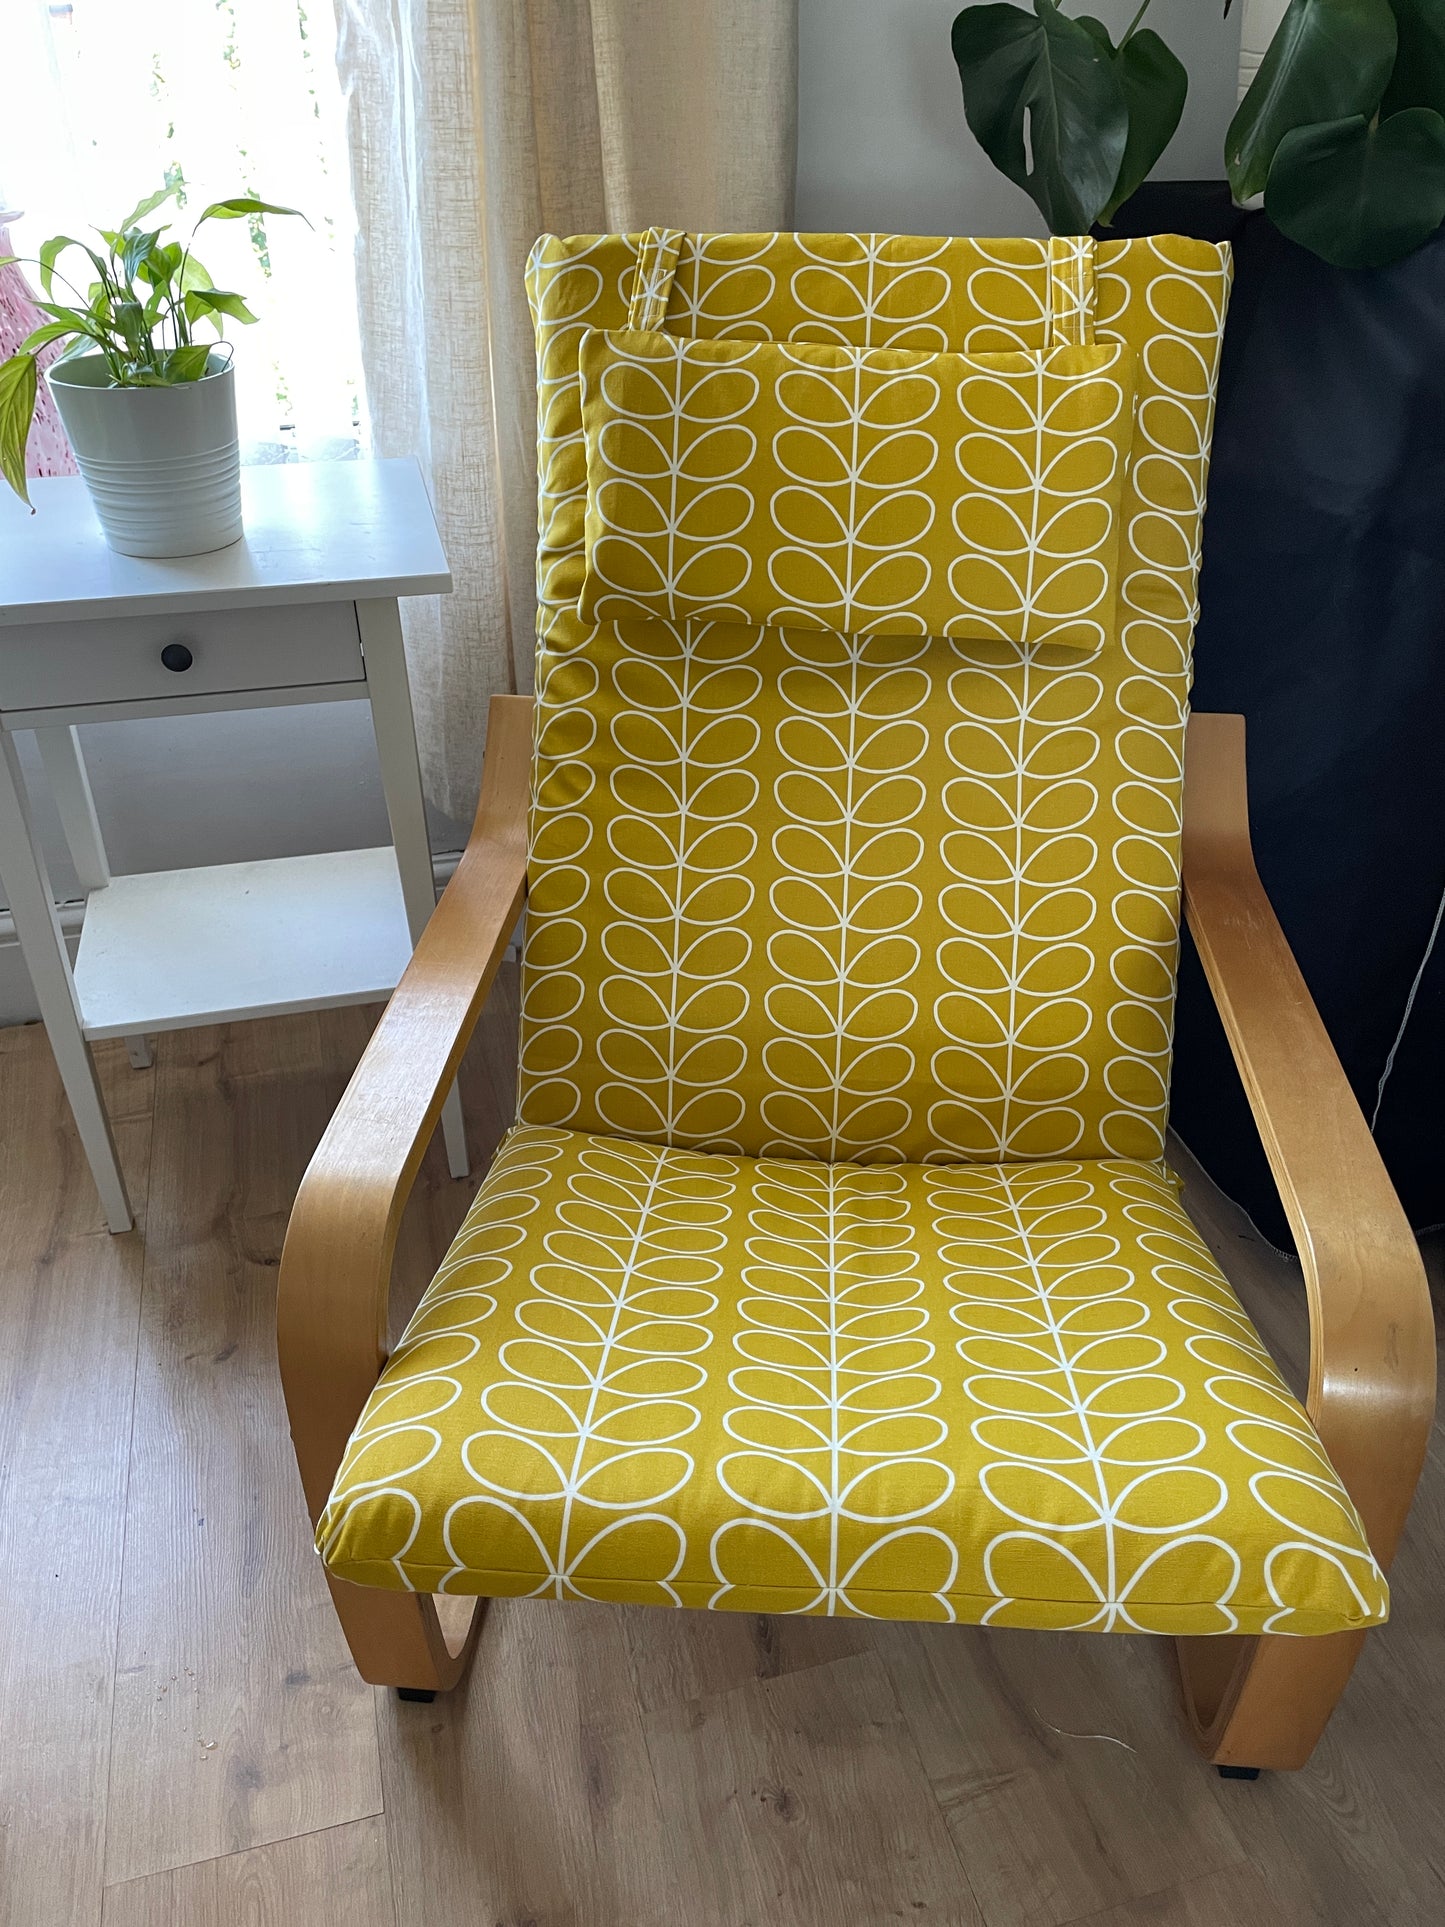 IKEA Poang chair cover in contemporary pattern cotton fabric, Dandelion